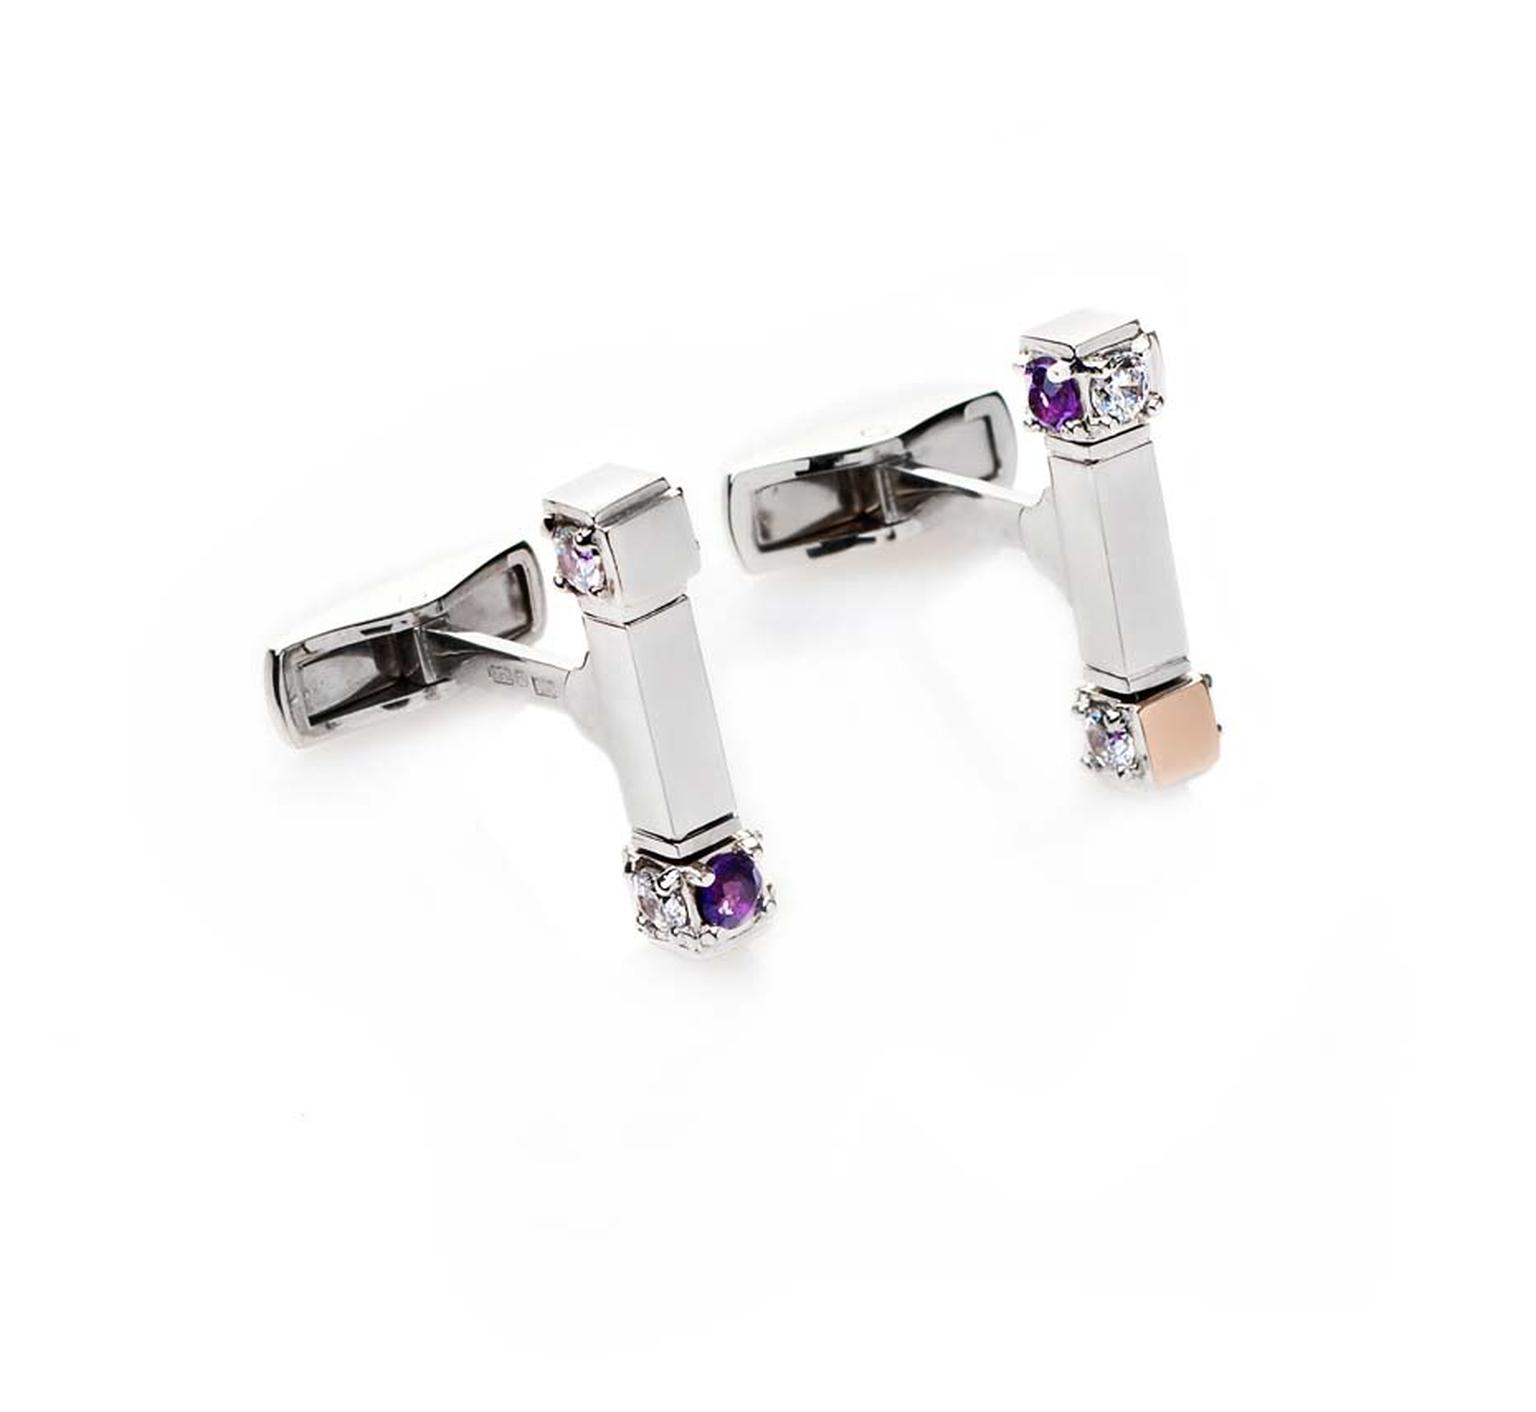 MyriamSOS' cufflinks with amethysts and diamonds can be adjusted thanks to the rotating tops, which spin round four times to create different looks.